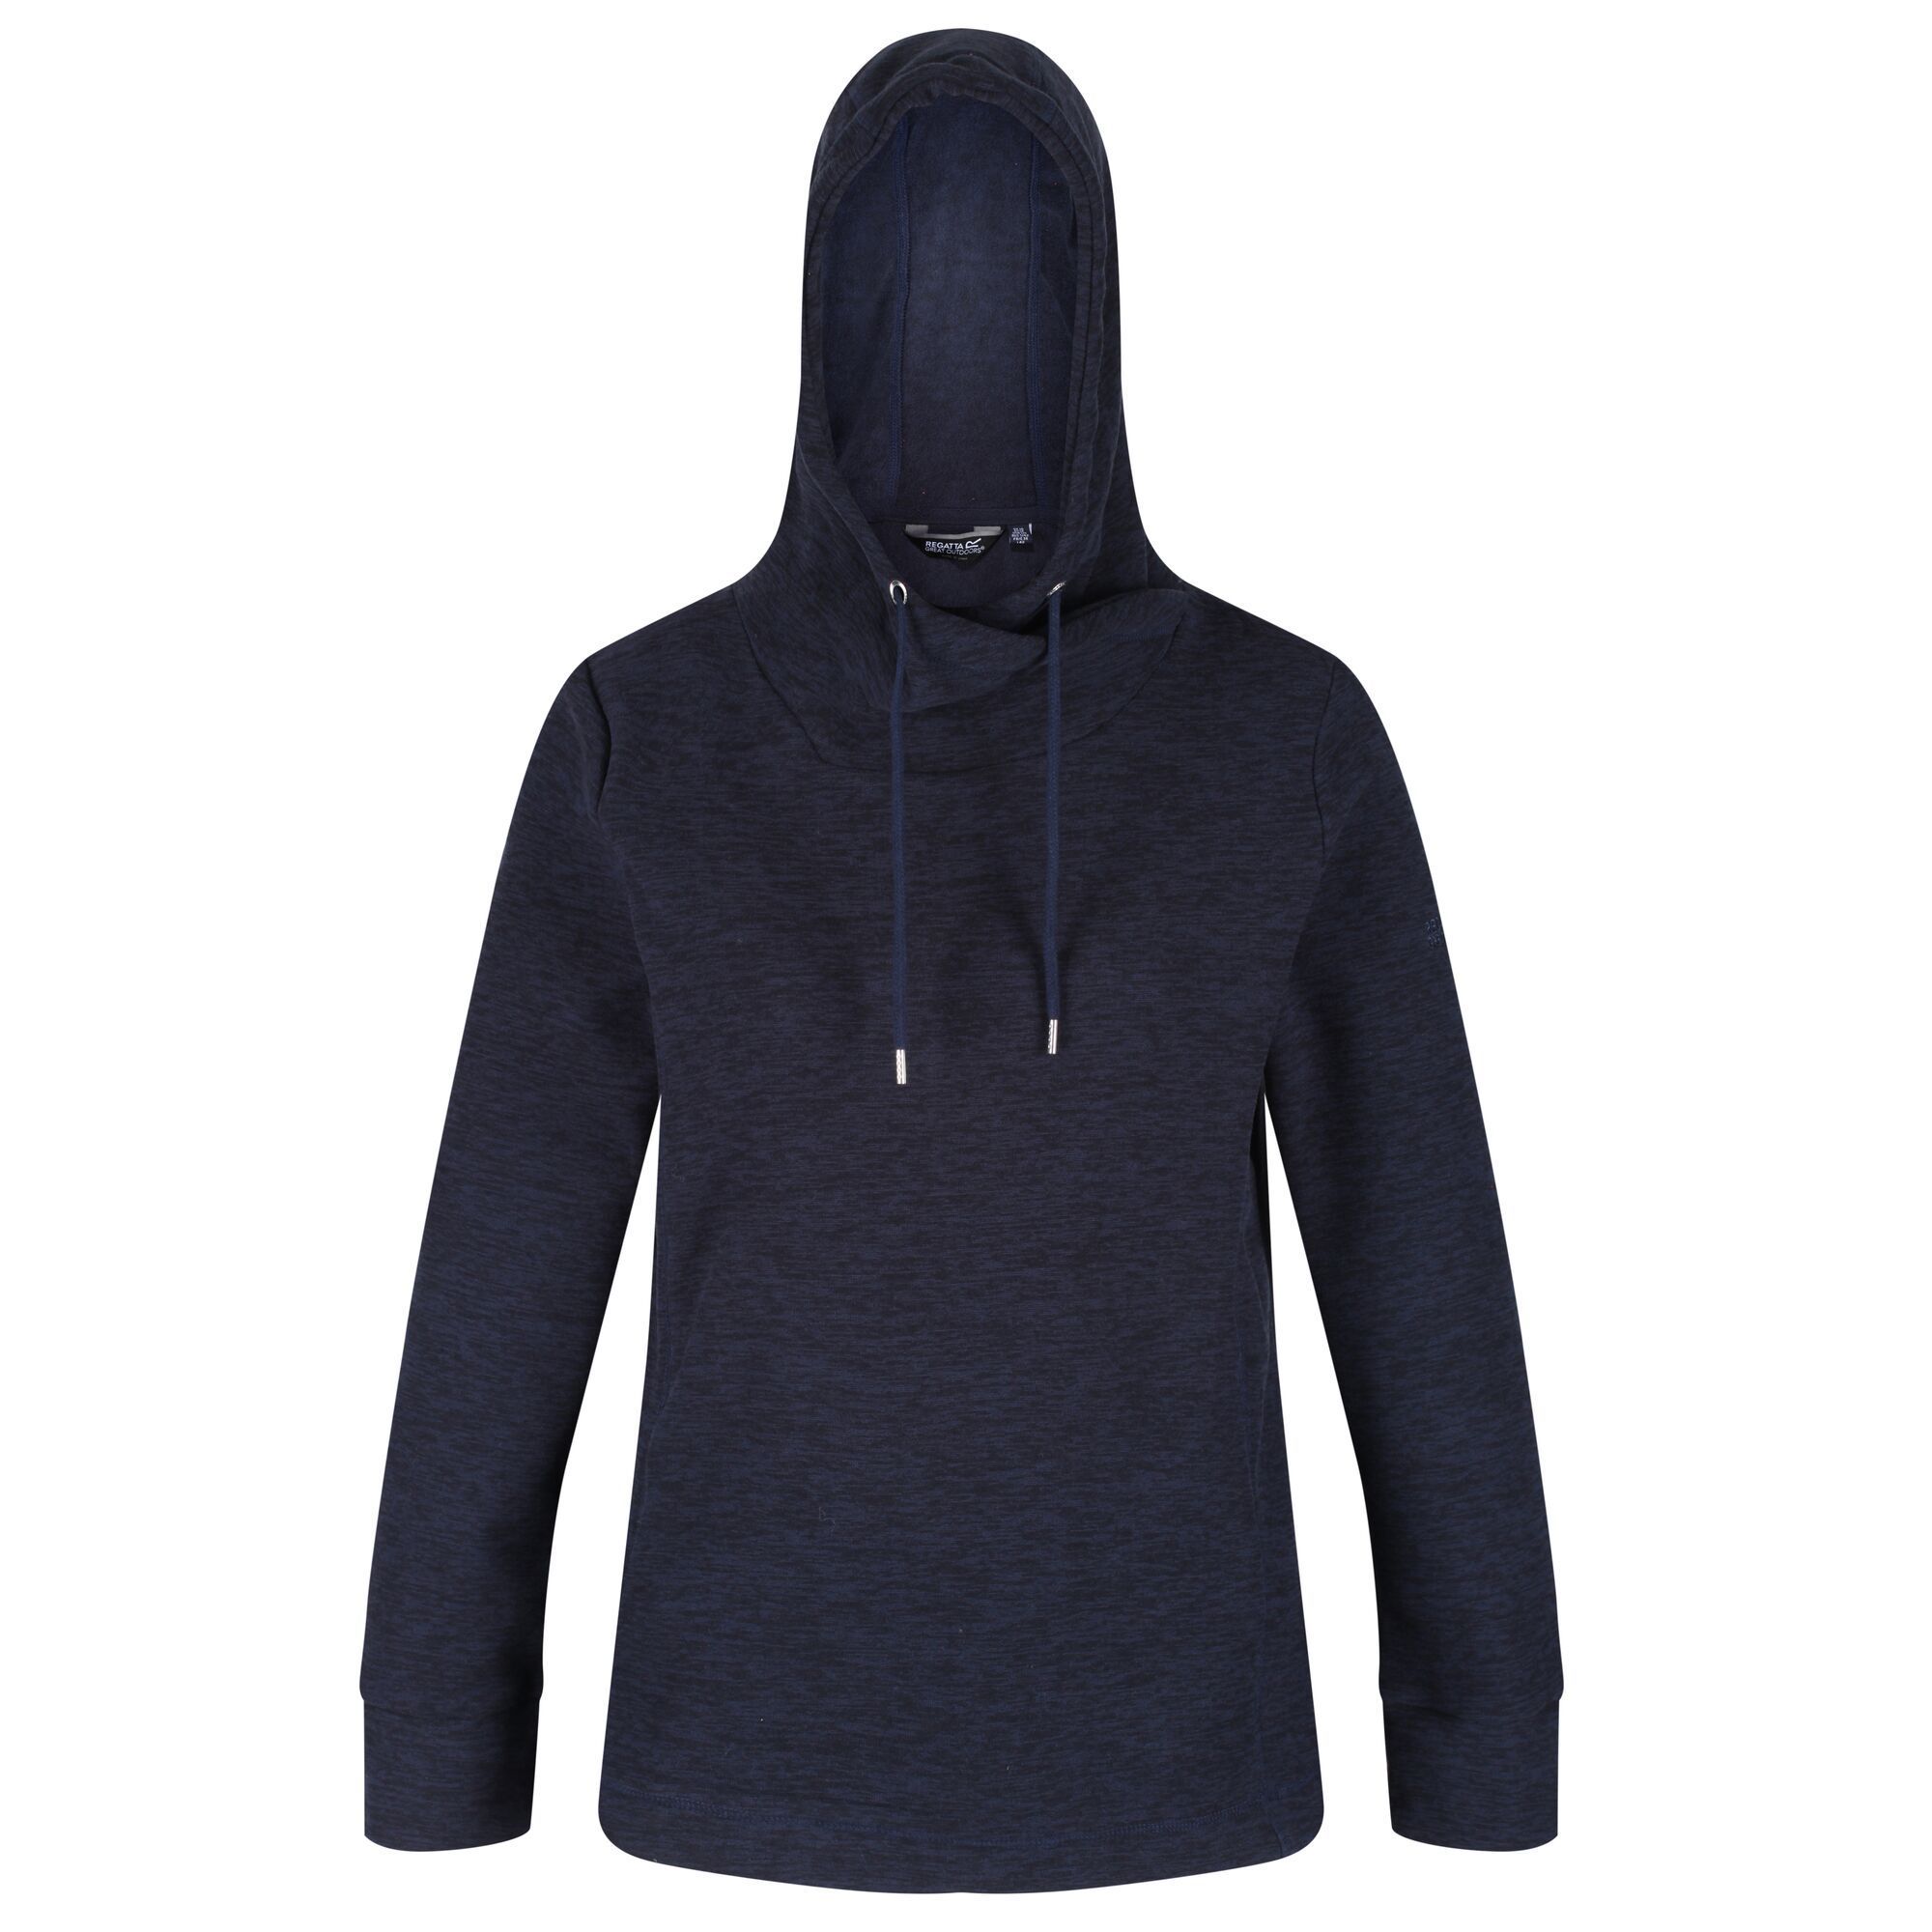 100% Polyester. Slouchy fleece sweater for weekend adventures. Made from soft touch fleece. Grown on hood with wrap around cowl neck construction. 2 lower pockets. 240Gsm.